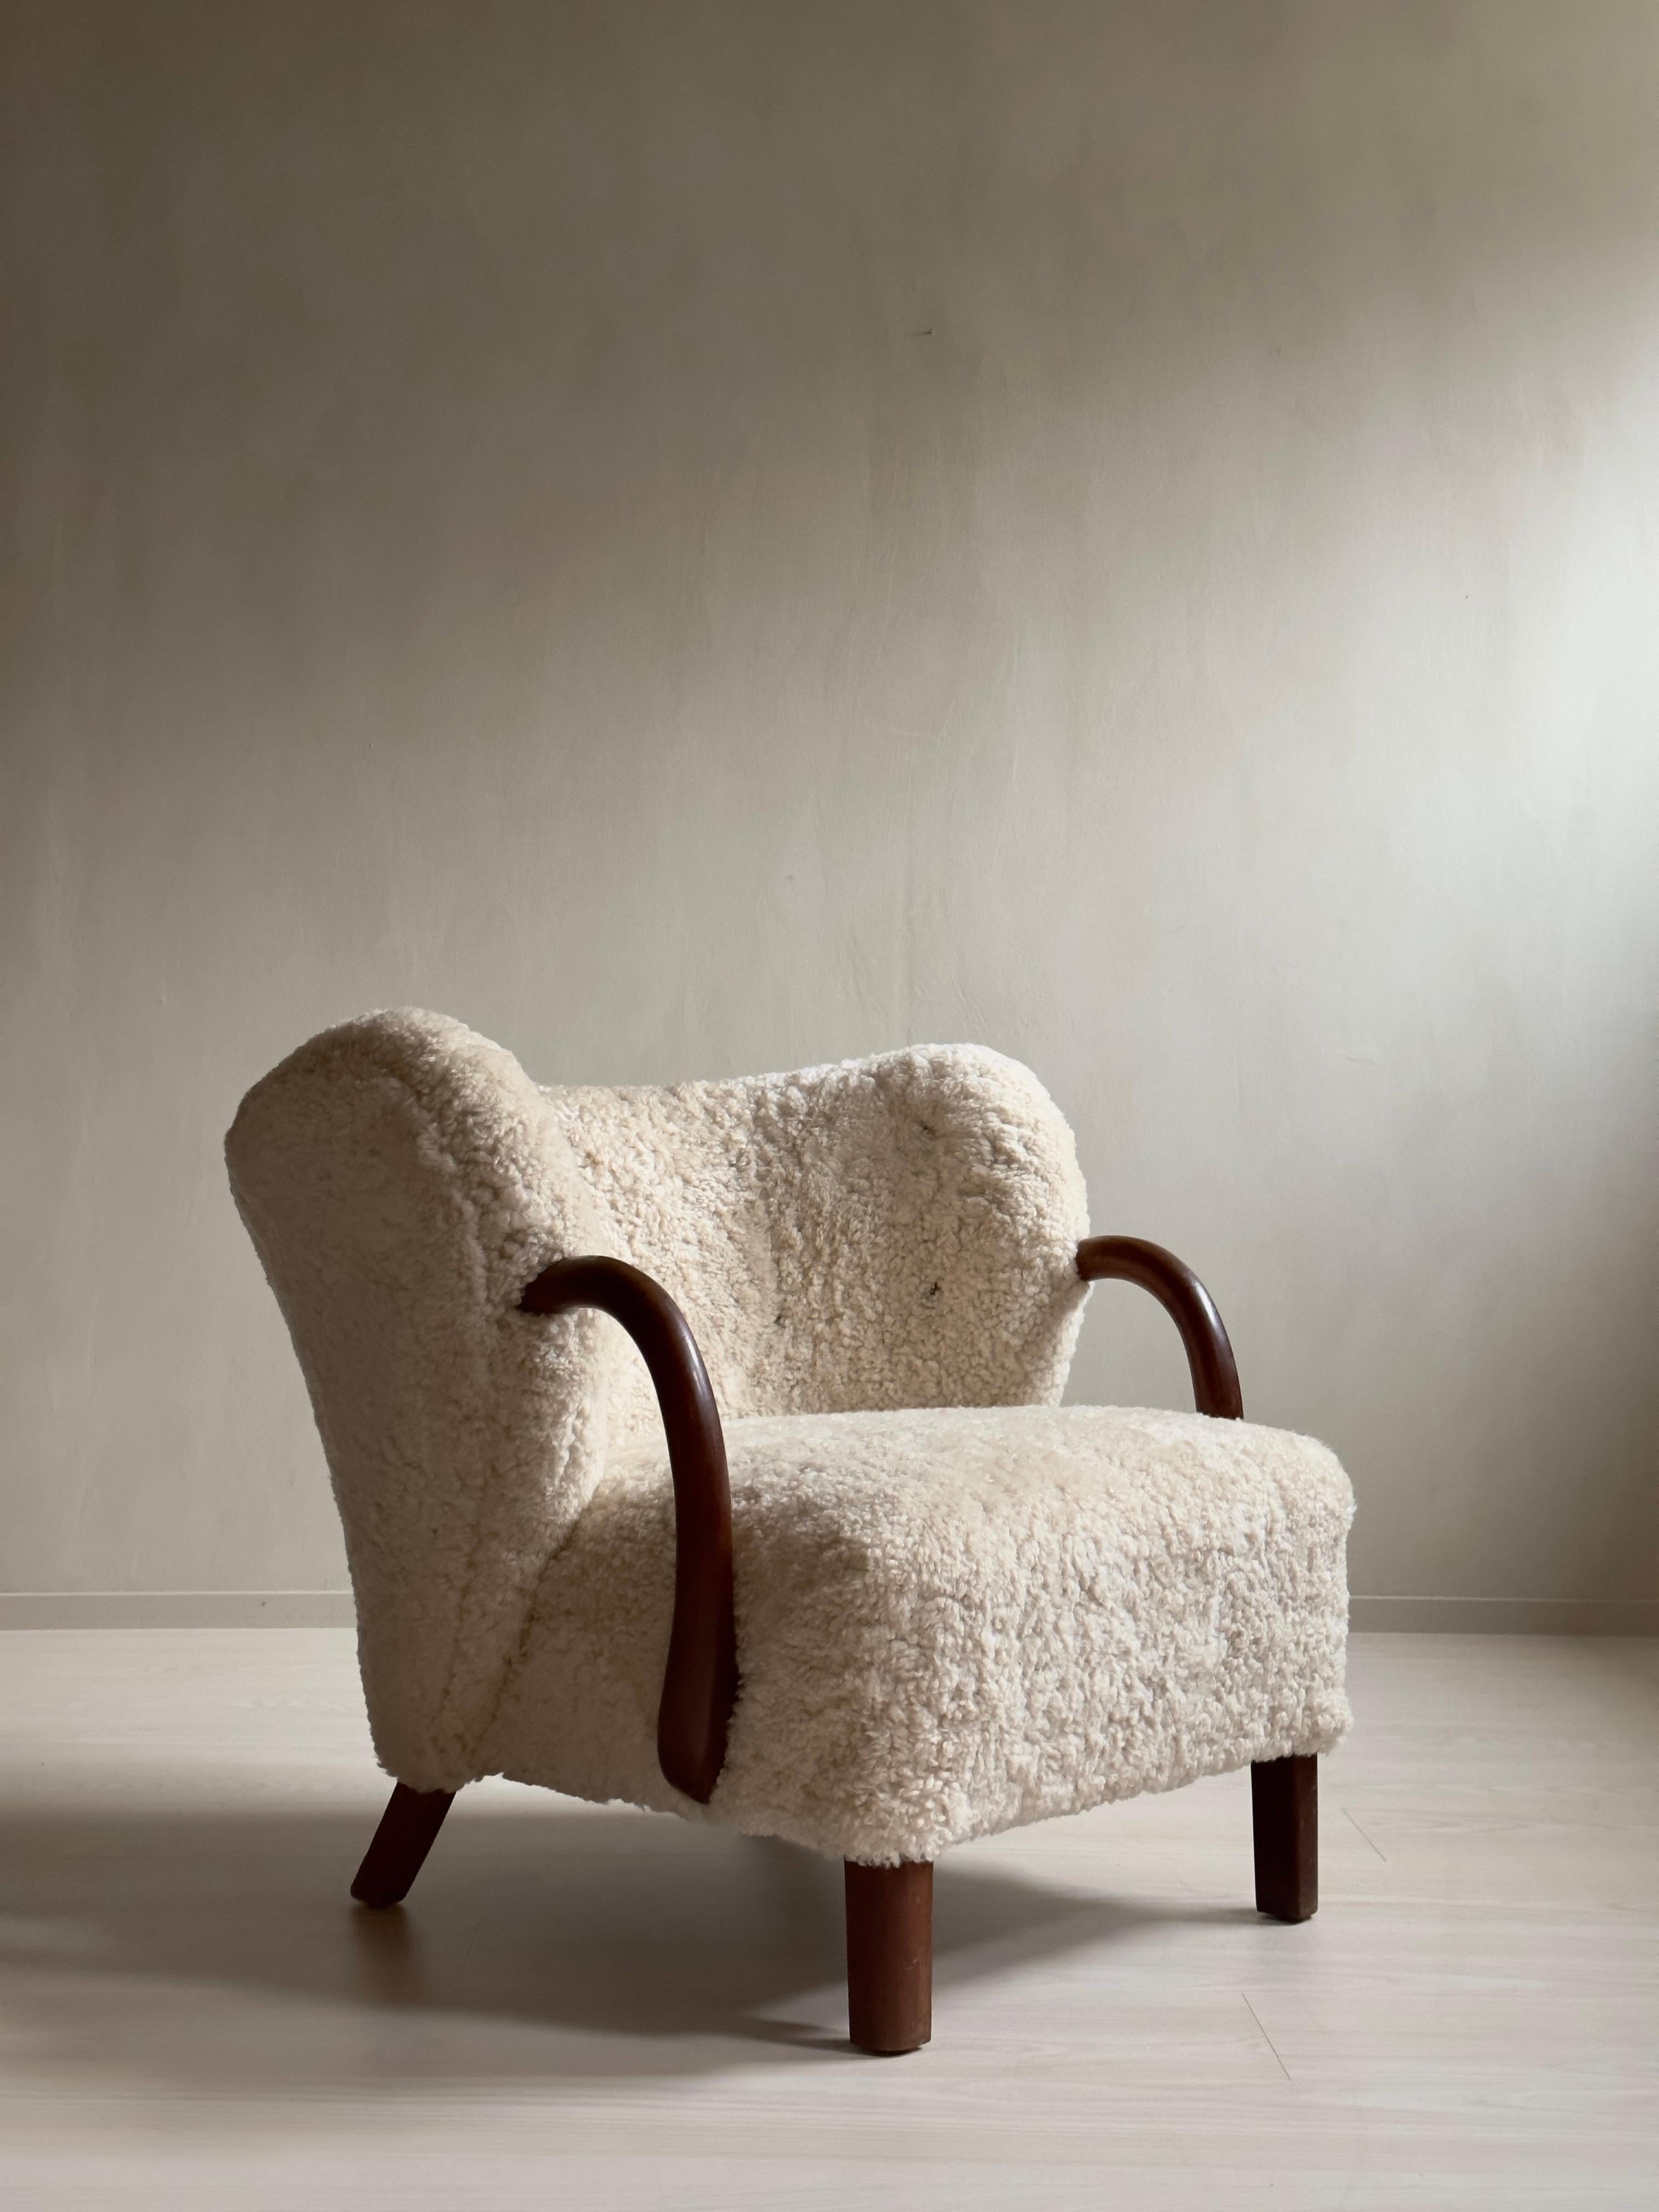 A rare armchair by Viggo Boesen, model 107 for Slagelse Møbelværk. Produced in Denmark in the 1940s. Arms and legs of dark stained oak, newly reupholstered in premium shearling. 

